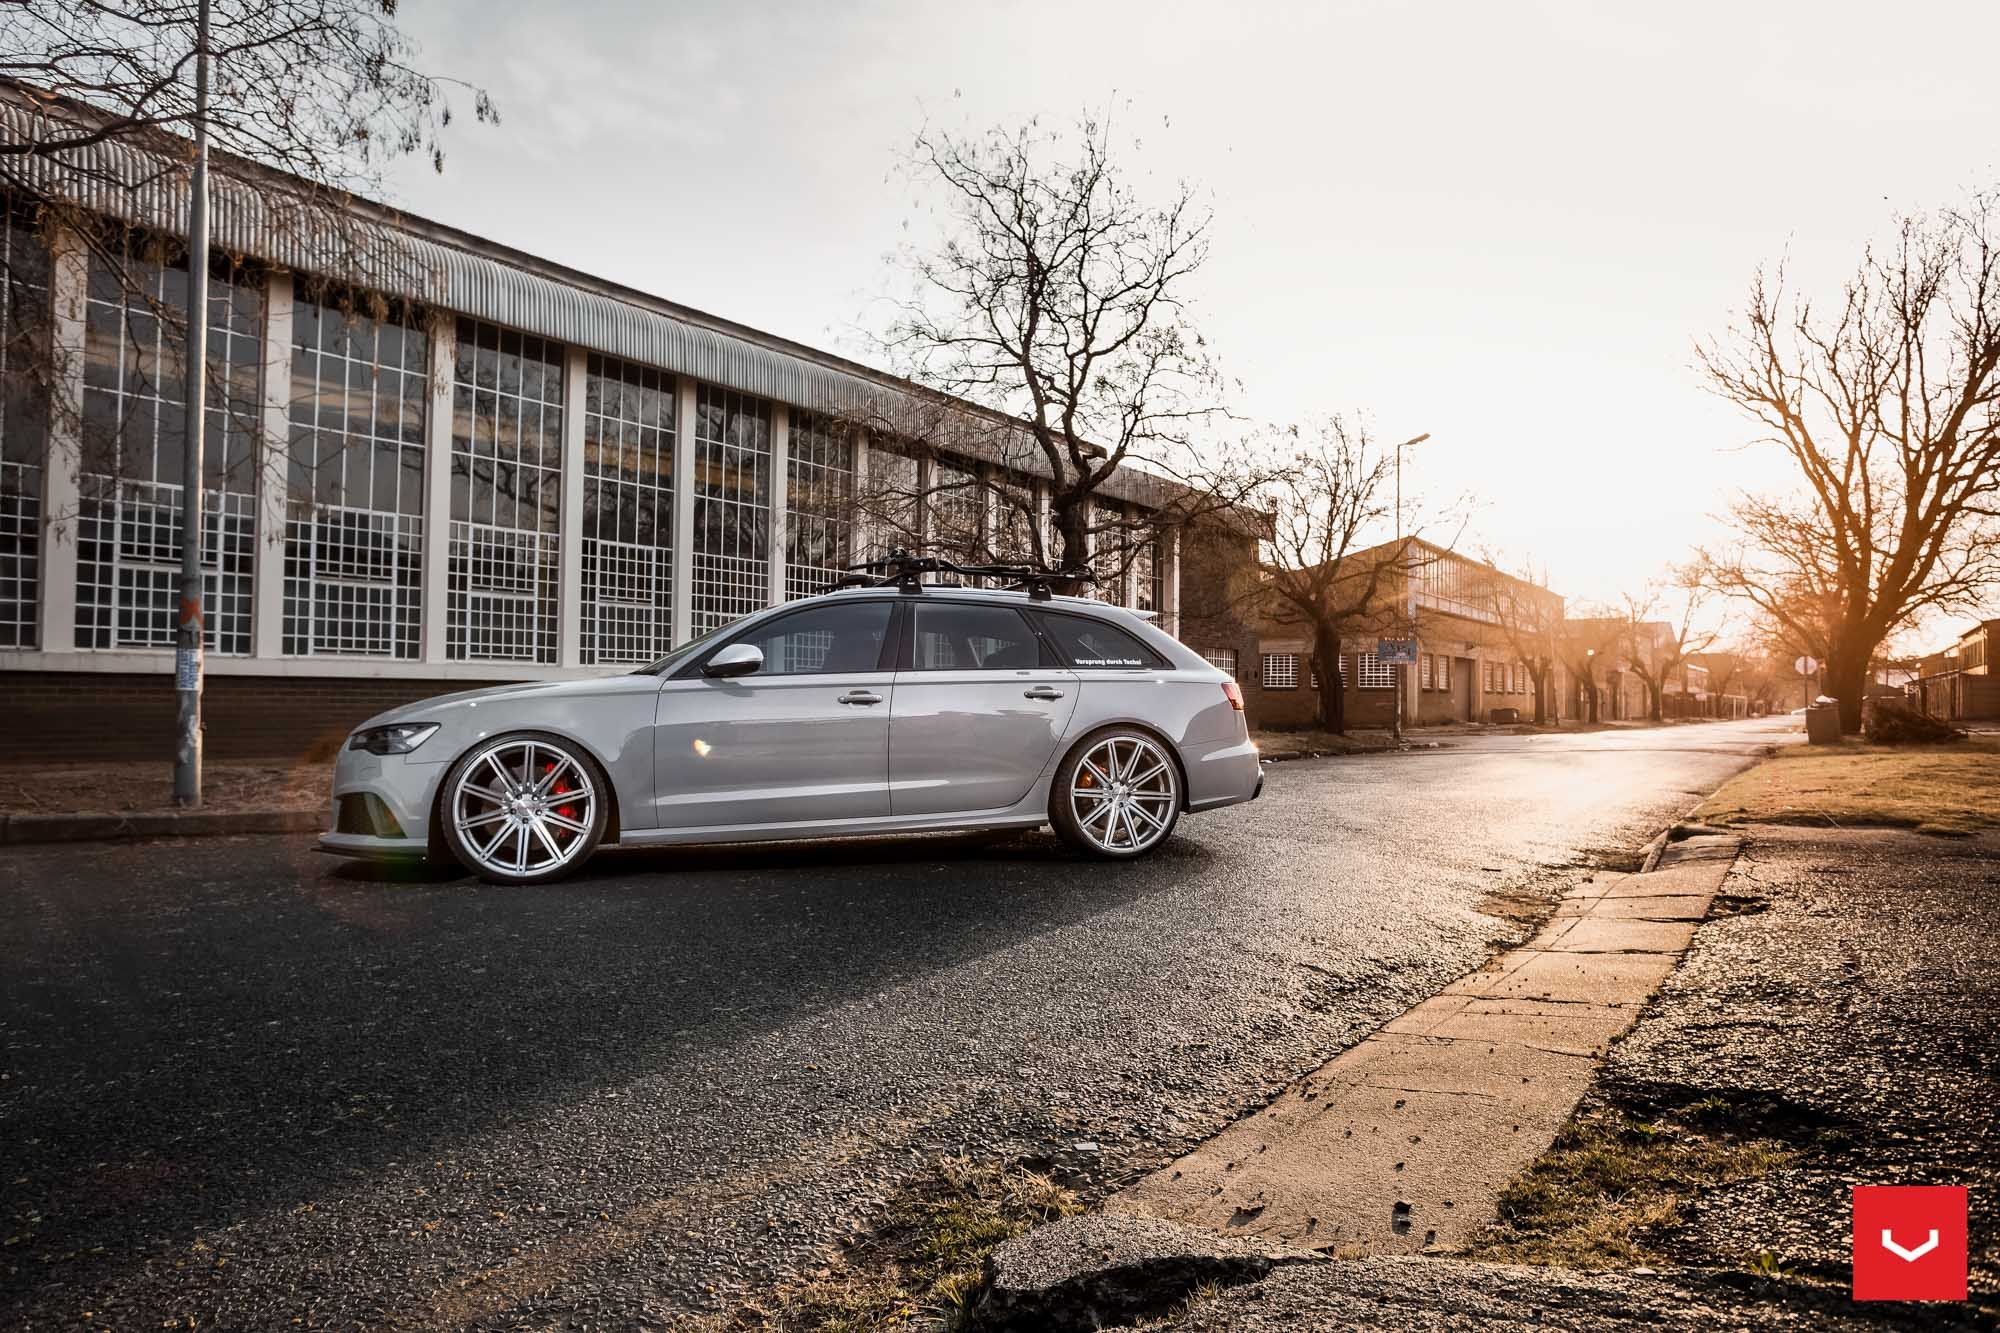 Aftermarket Side Skirts on Gray Audi S6 - Photo by Vossen